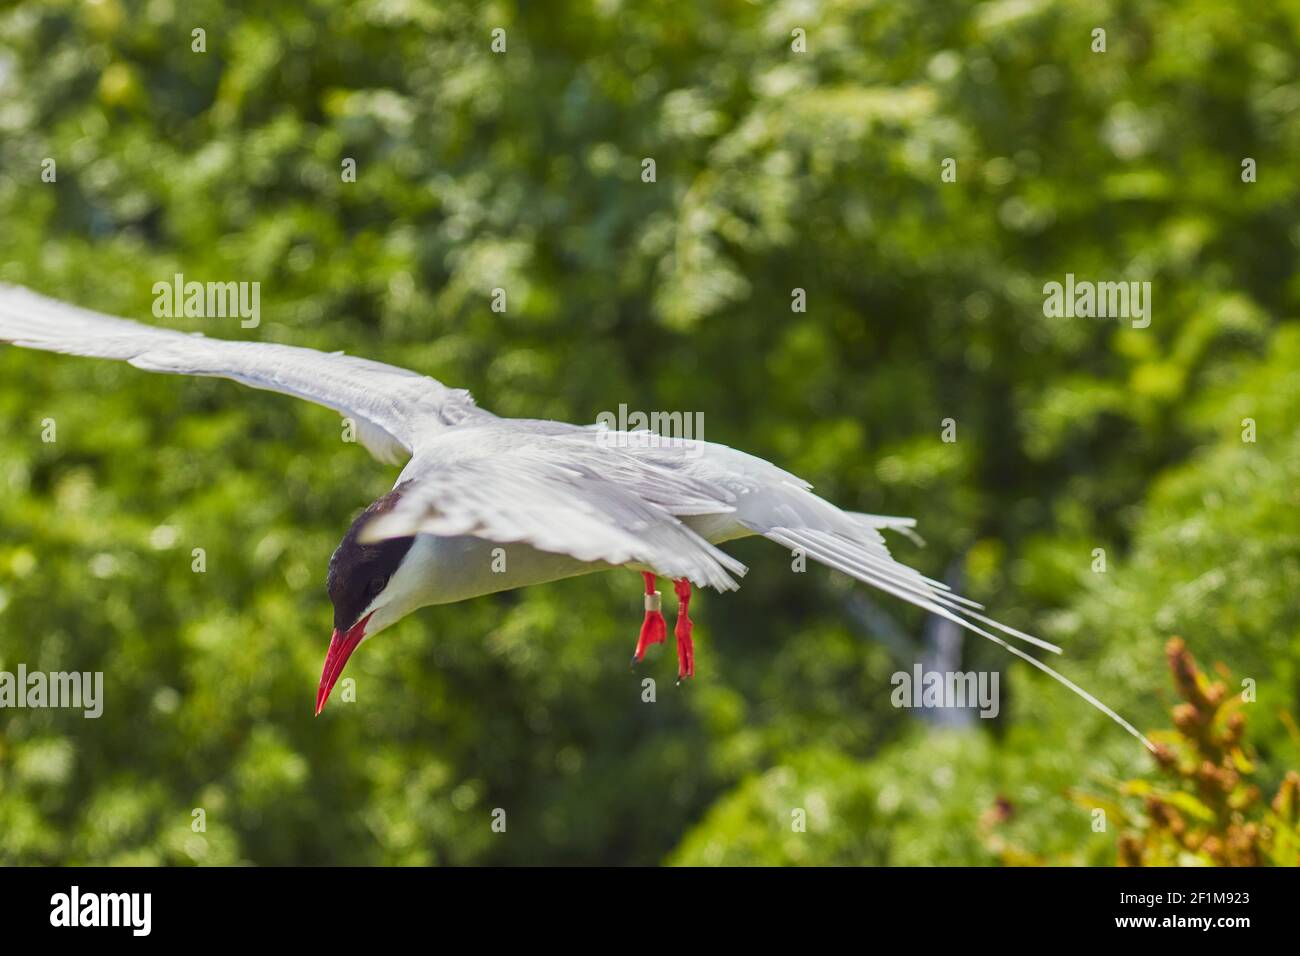 An Arctic Tern, Sterna paradisaea, defending its nesting territory from visitors, on Inner Farne, the Farne Islands, Northumberland, Great Britain. Stock Photo